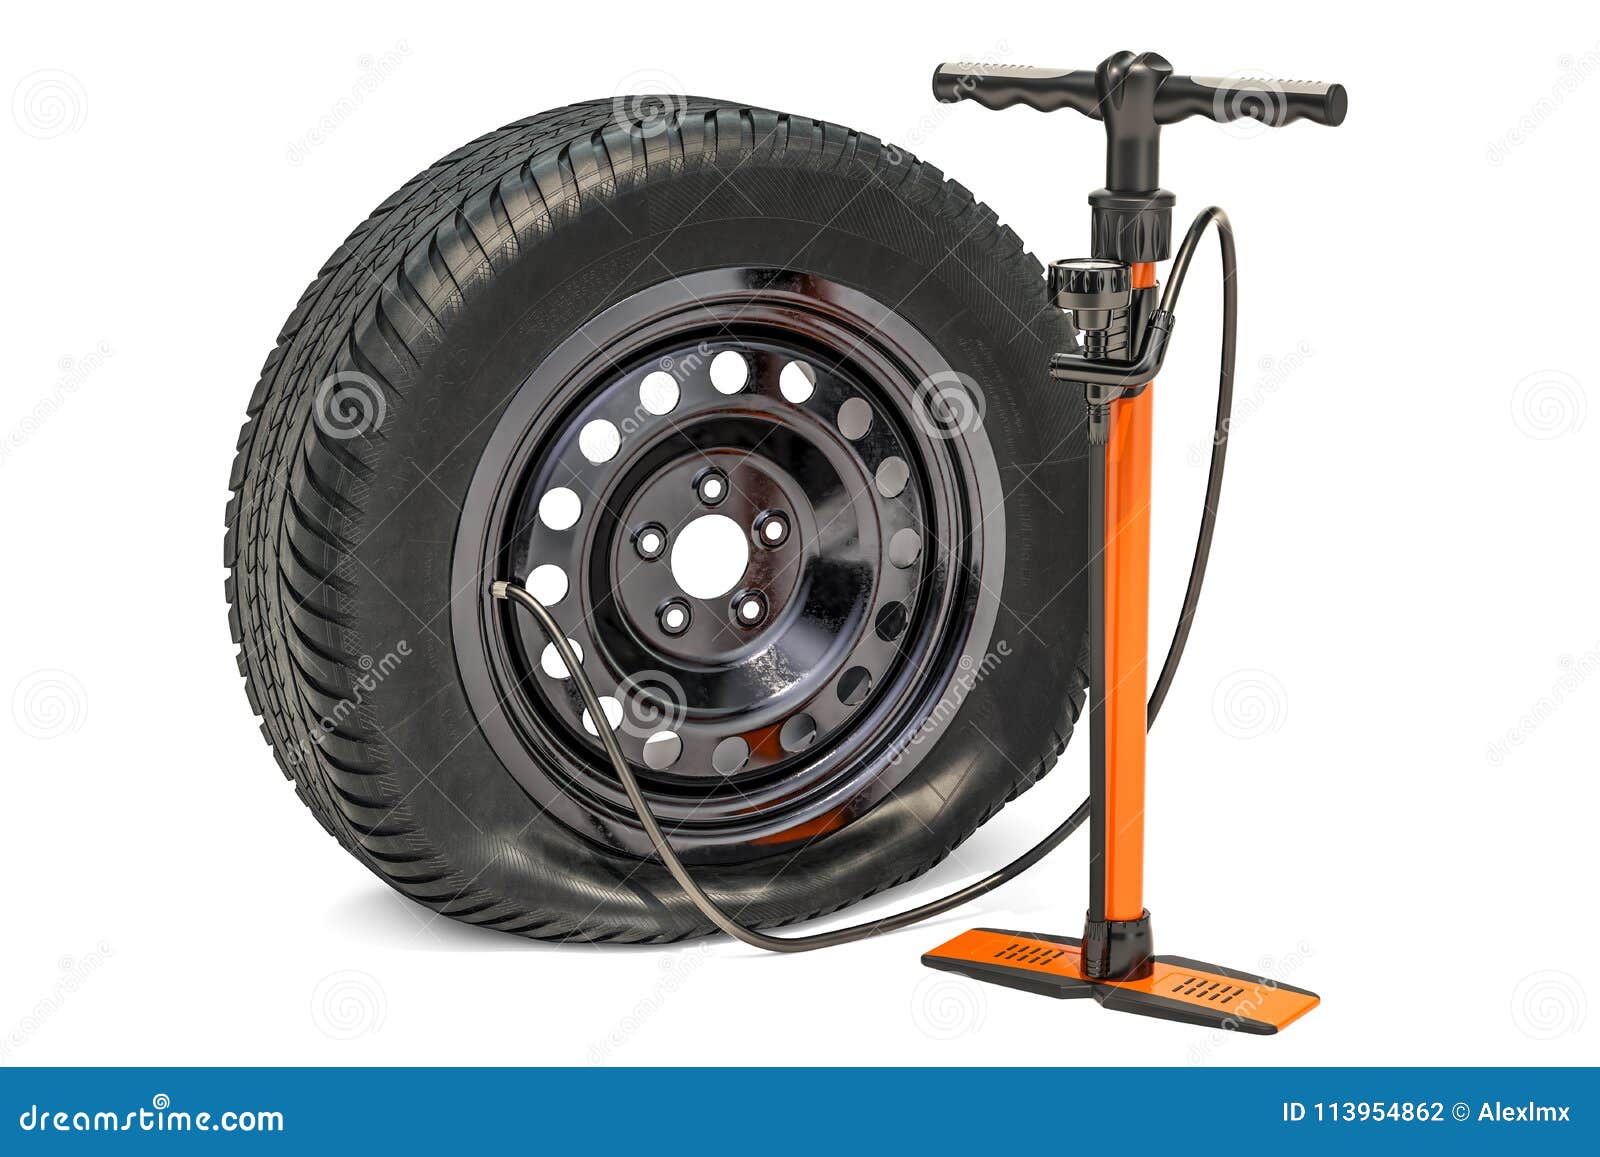 High Pressure Hand Pump With Puncture Car Wheel 3d Rendering